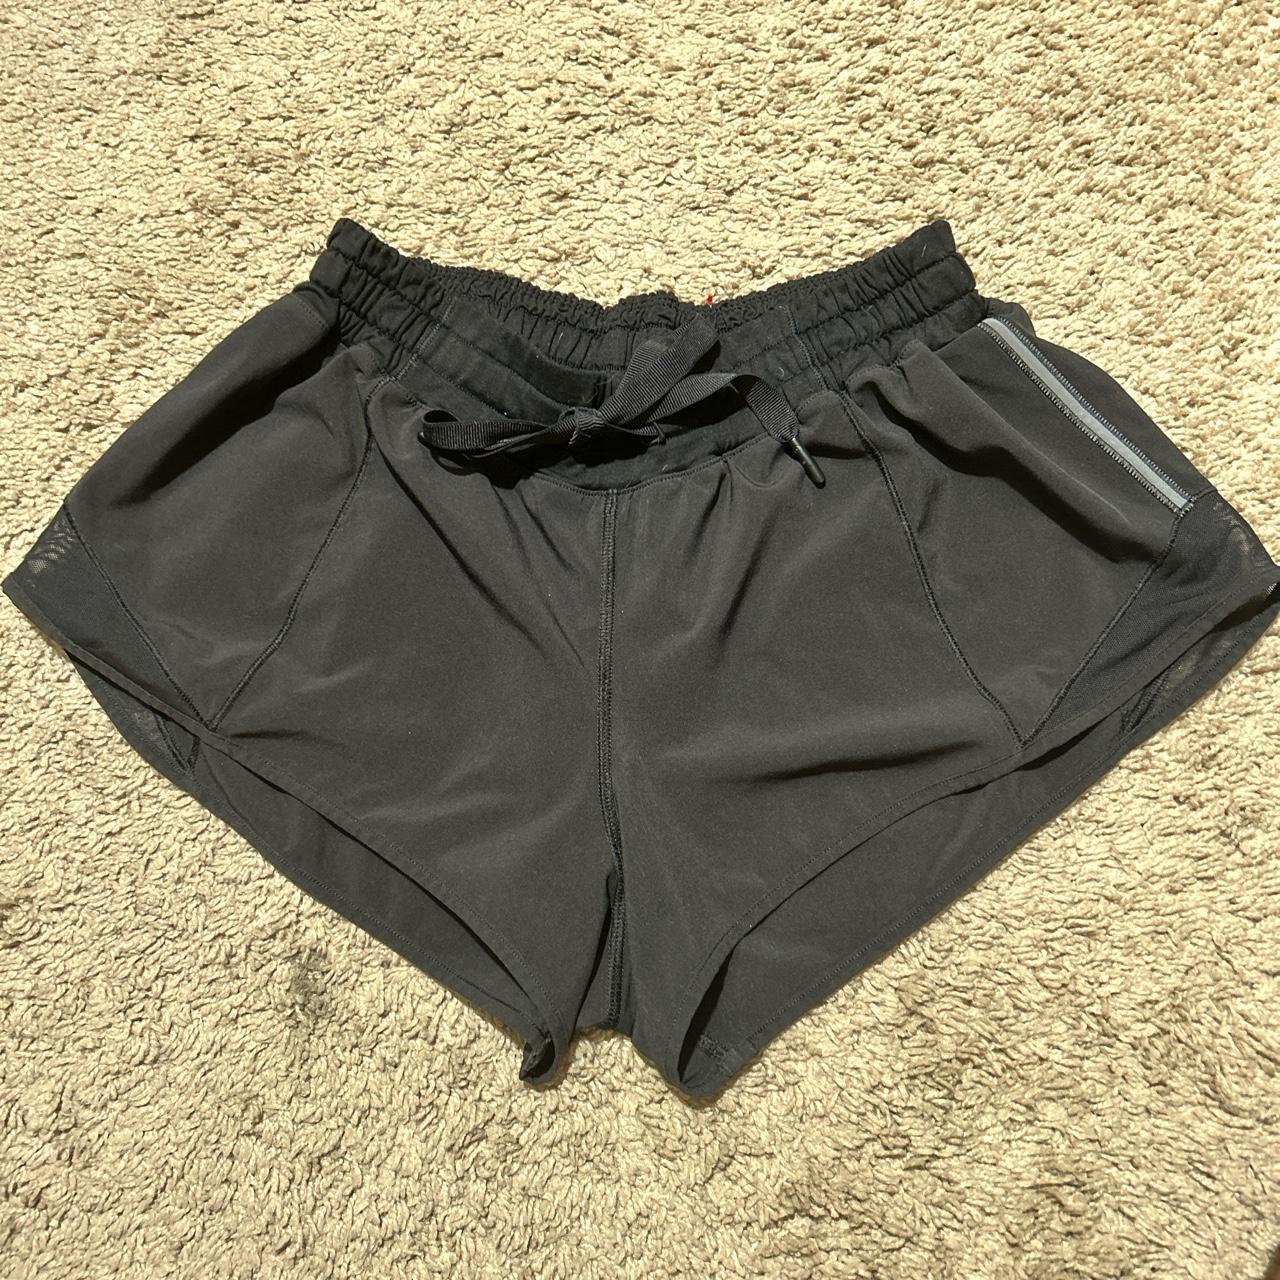 black lululemon shorts with tie in front. size 6 - Depop